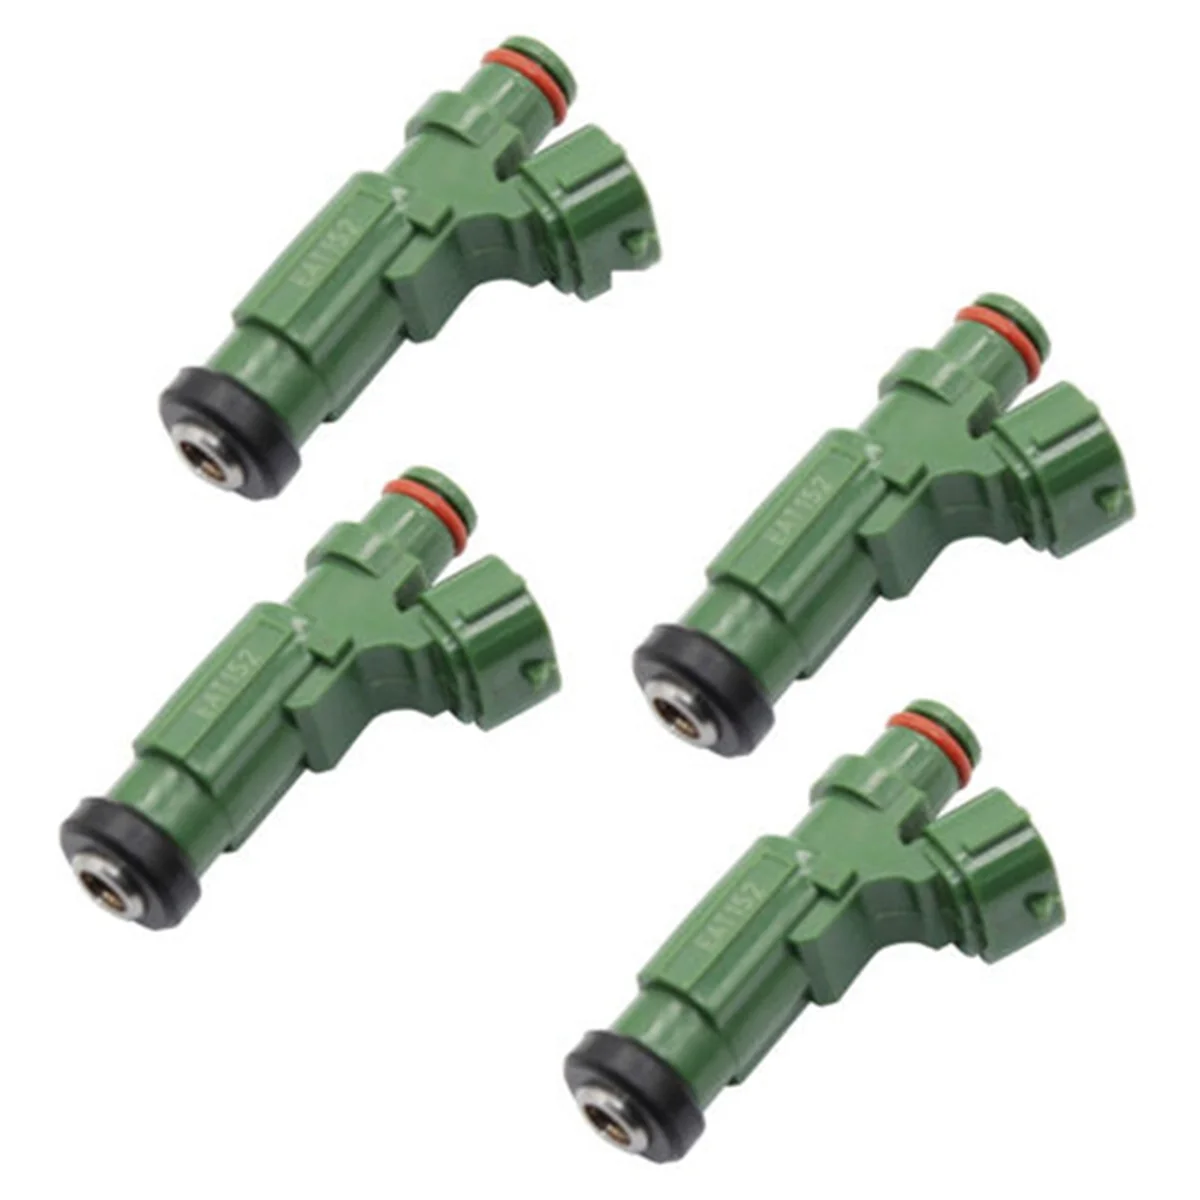 

4Pcs Fuel Injectors 63P-13761-01-00 63P-13761-01 63P1376101 63P137610100 for Yamaha Outboard F150 TXRD 150HP 4T